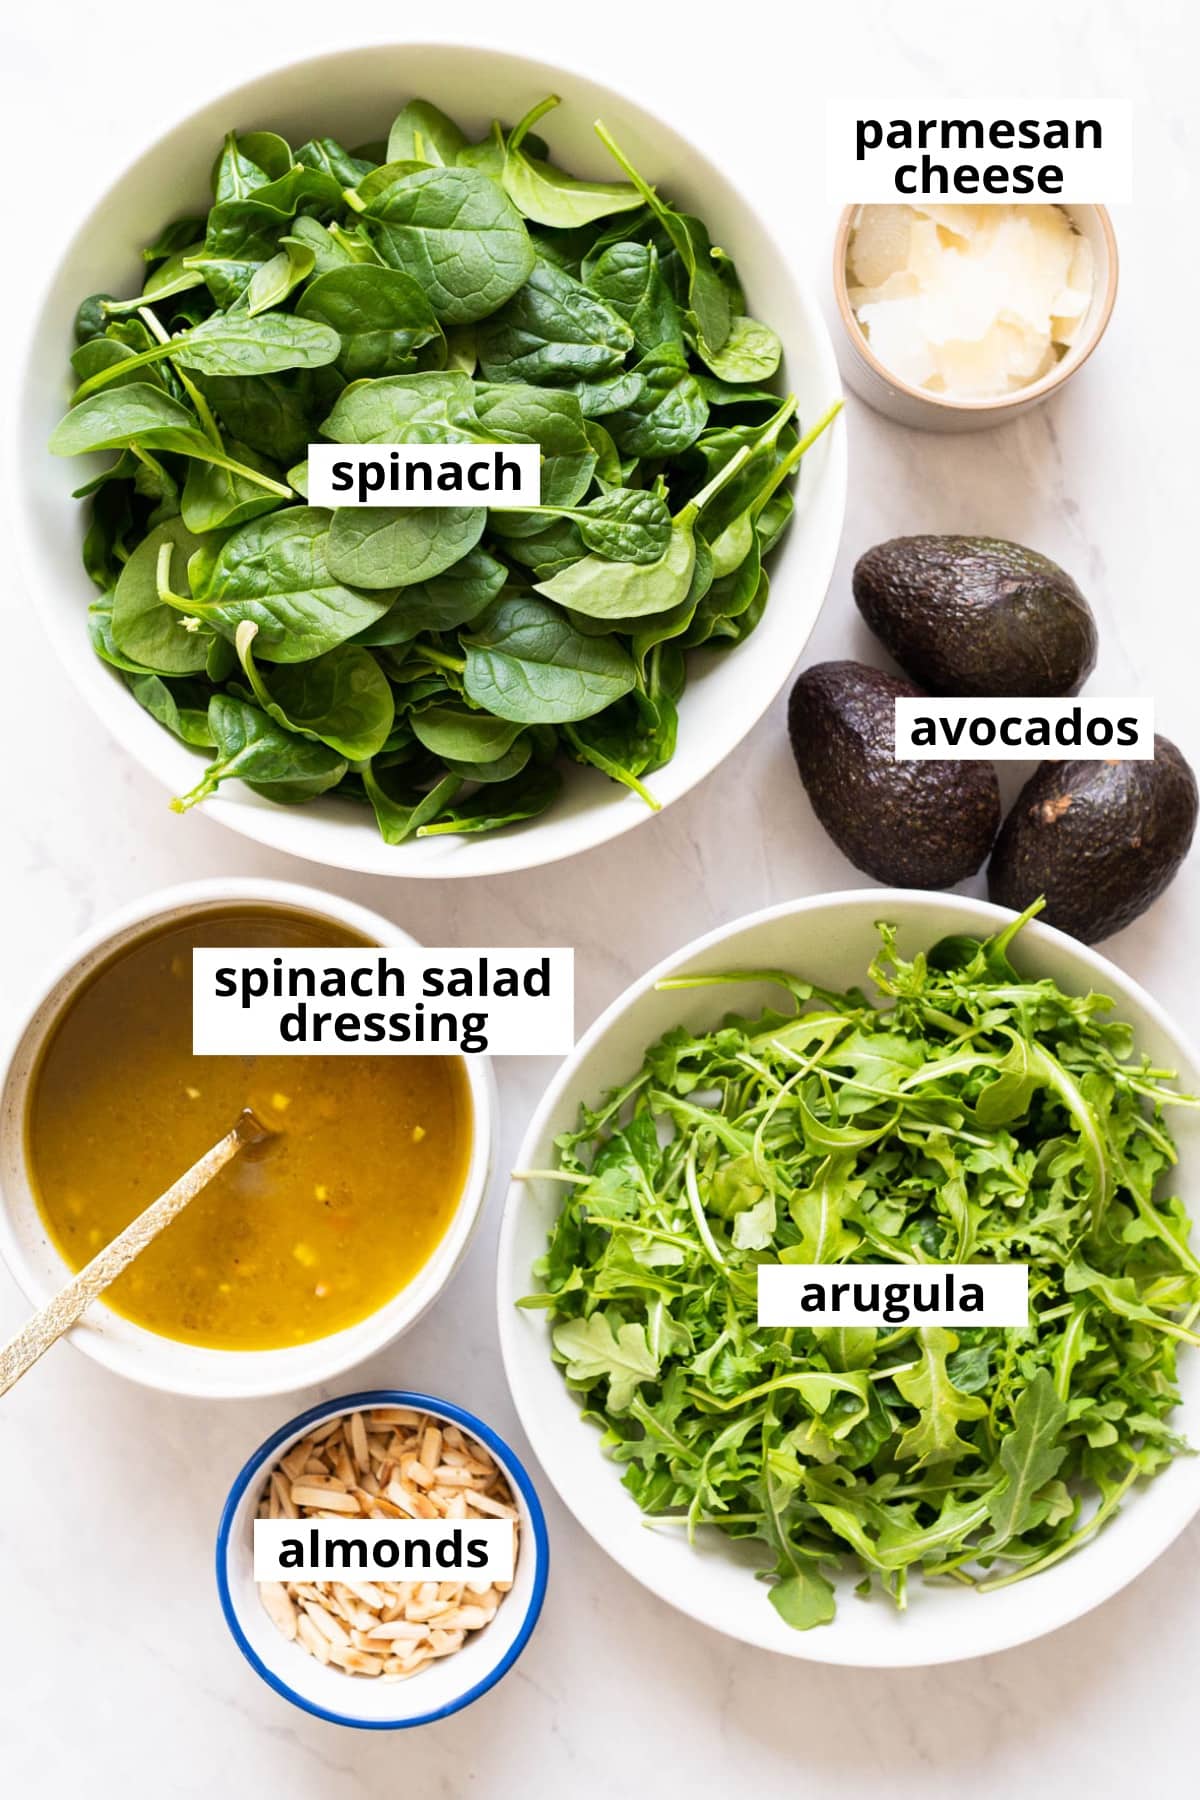 Spinach, arugula, avocados, spinach salad dressing, parmesan cheese, almonds.